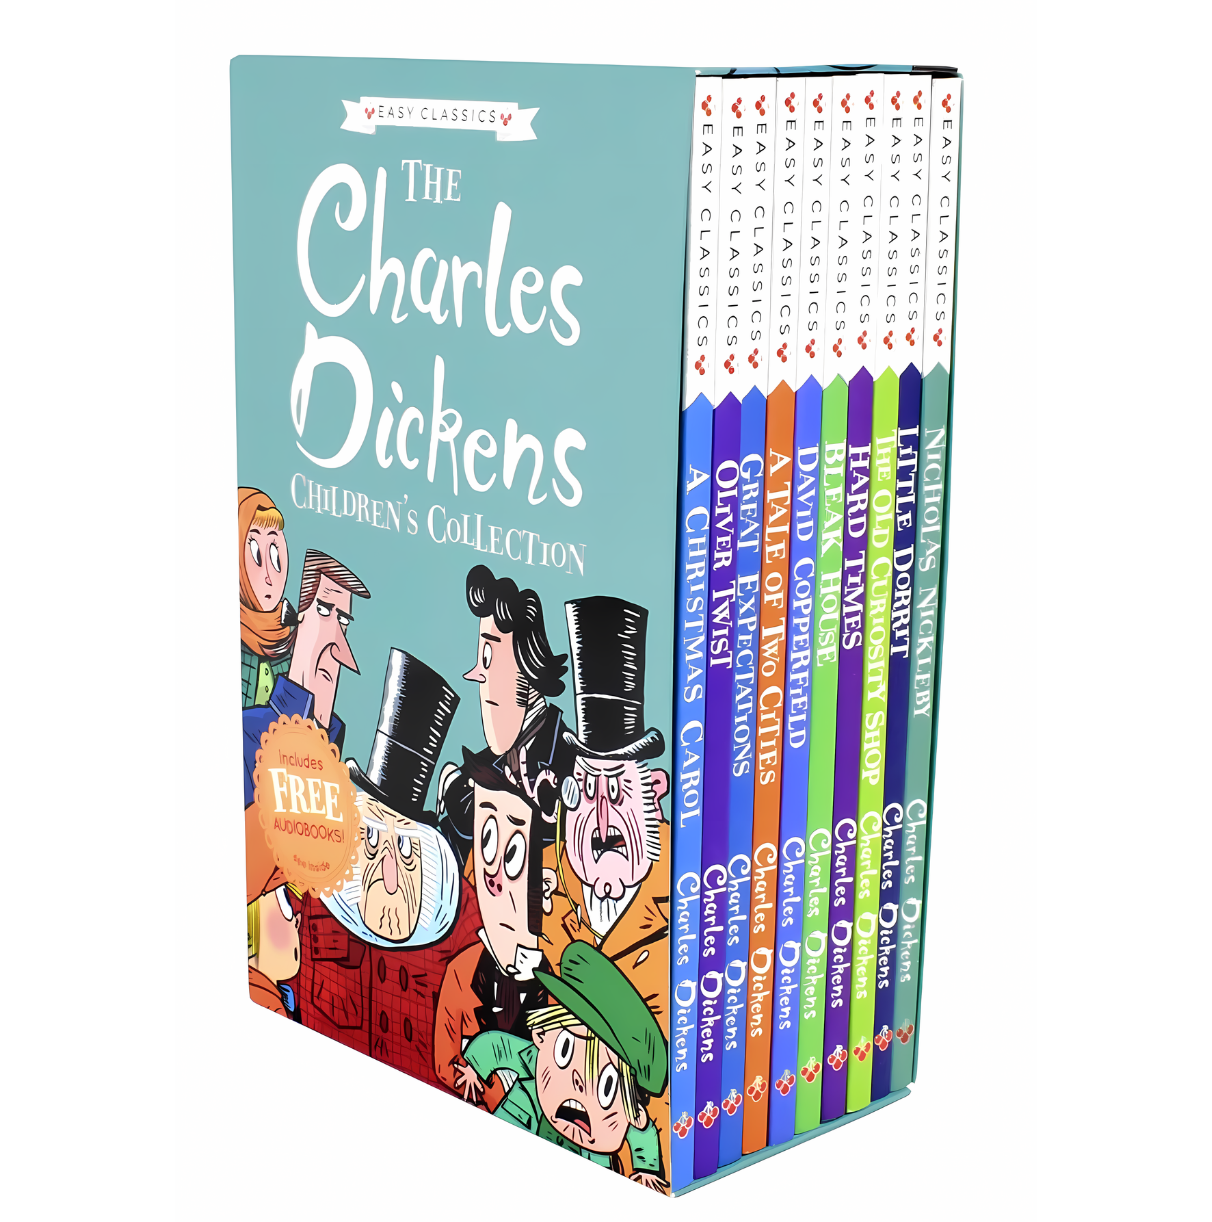 The Charles Dickens Children's Collection (Easy Classics) 10 Book Box Set (A Christmas Carol, Oliver Twist ... A Tale of Two Cities, Great Expectations)